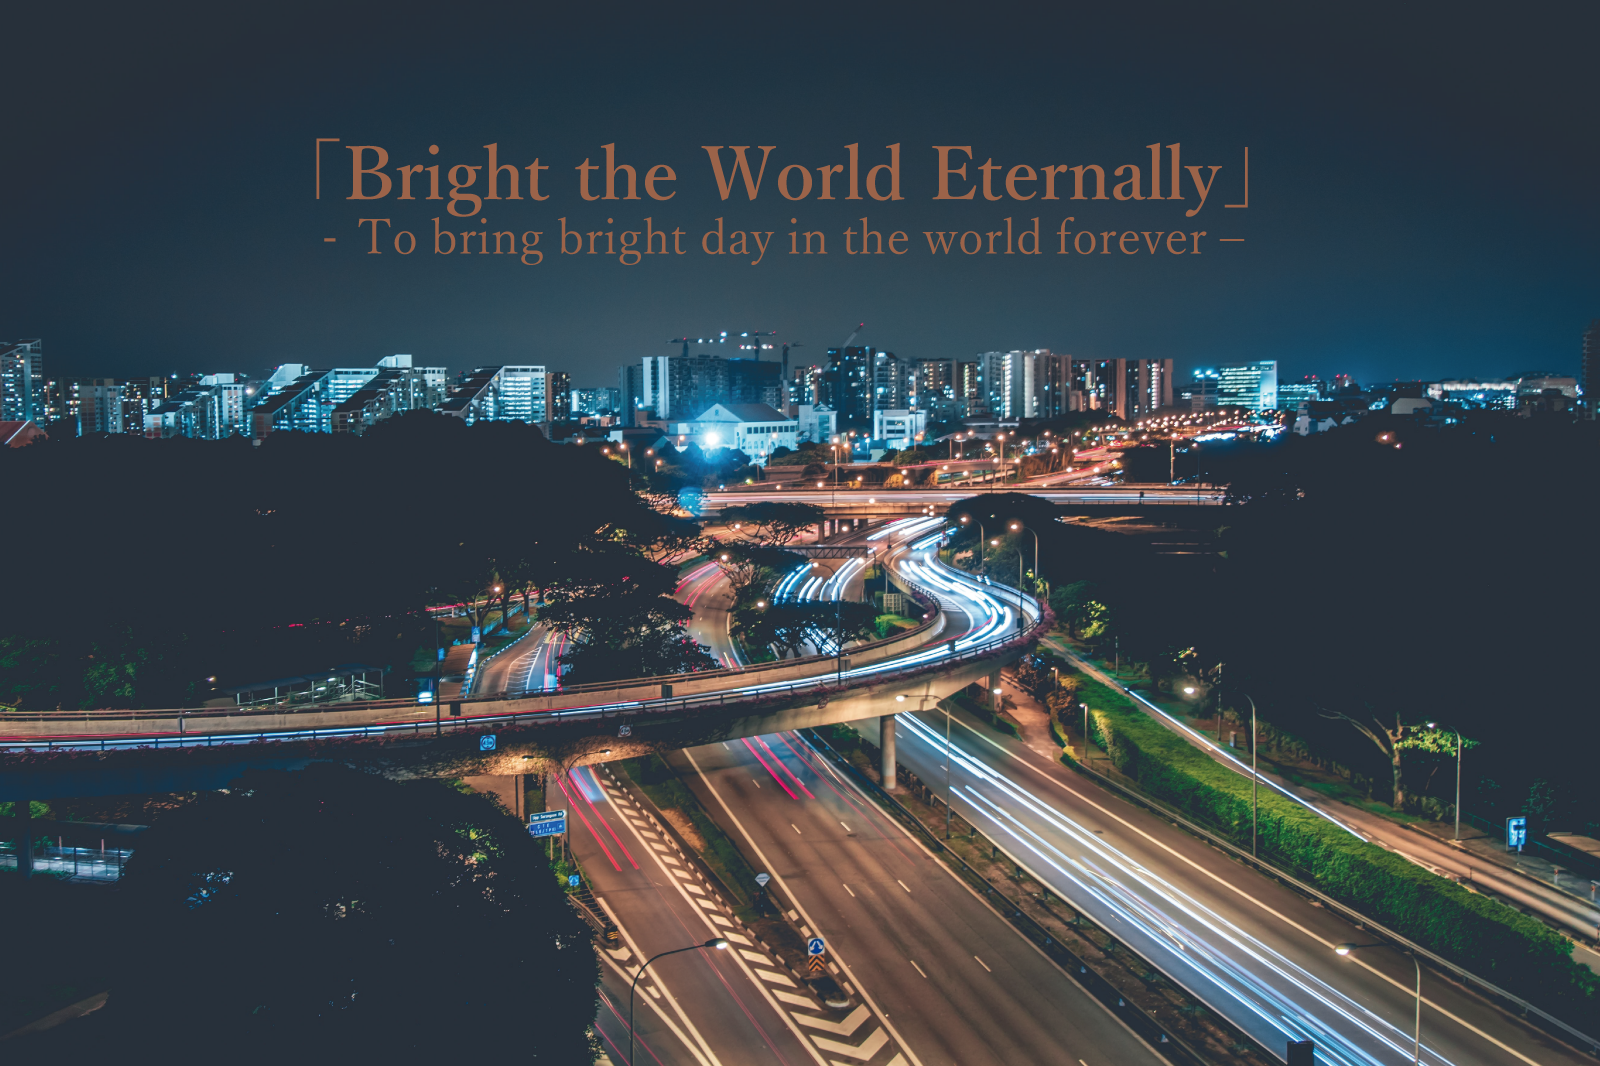 「Bright the World Eternally」To bring bright day in the world forever